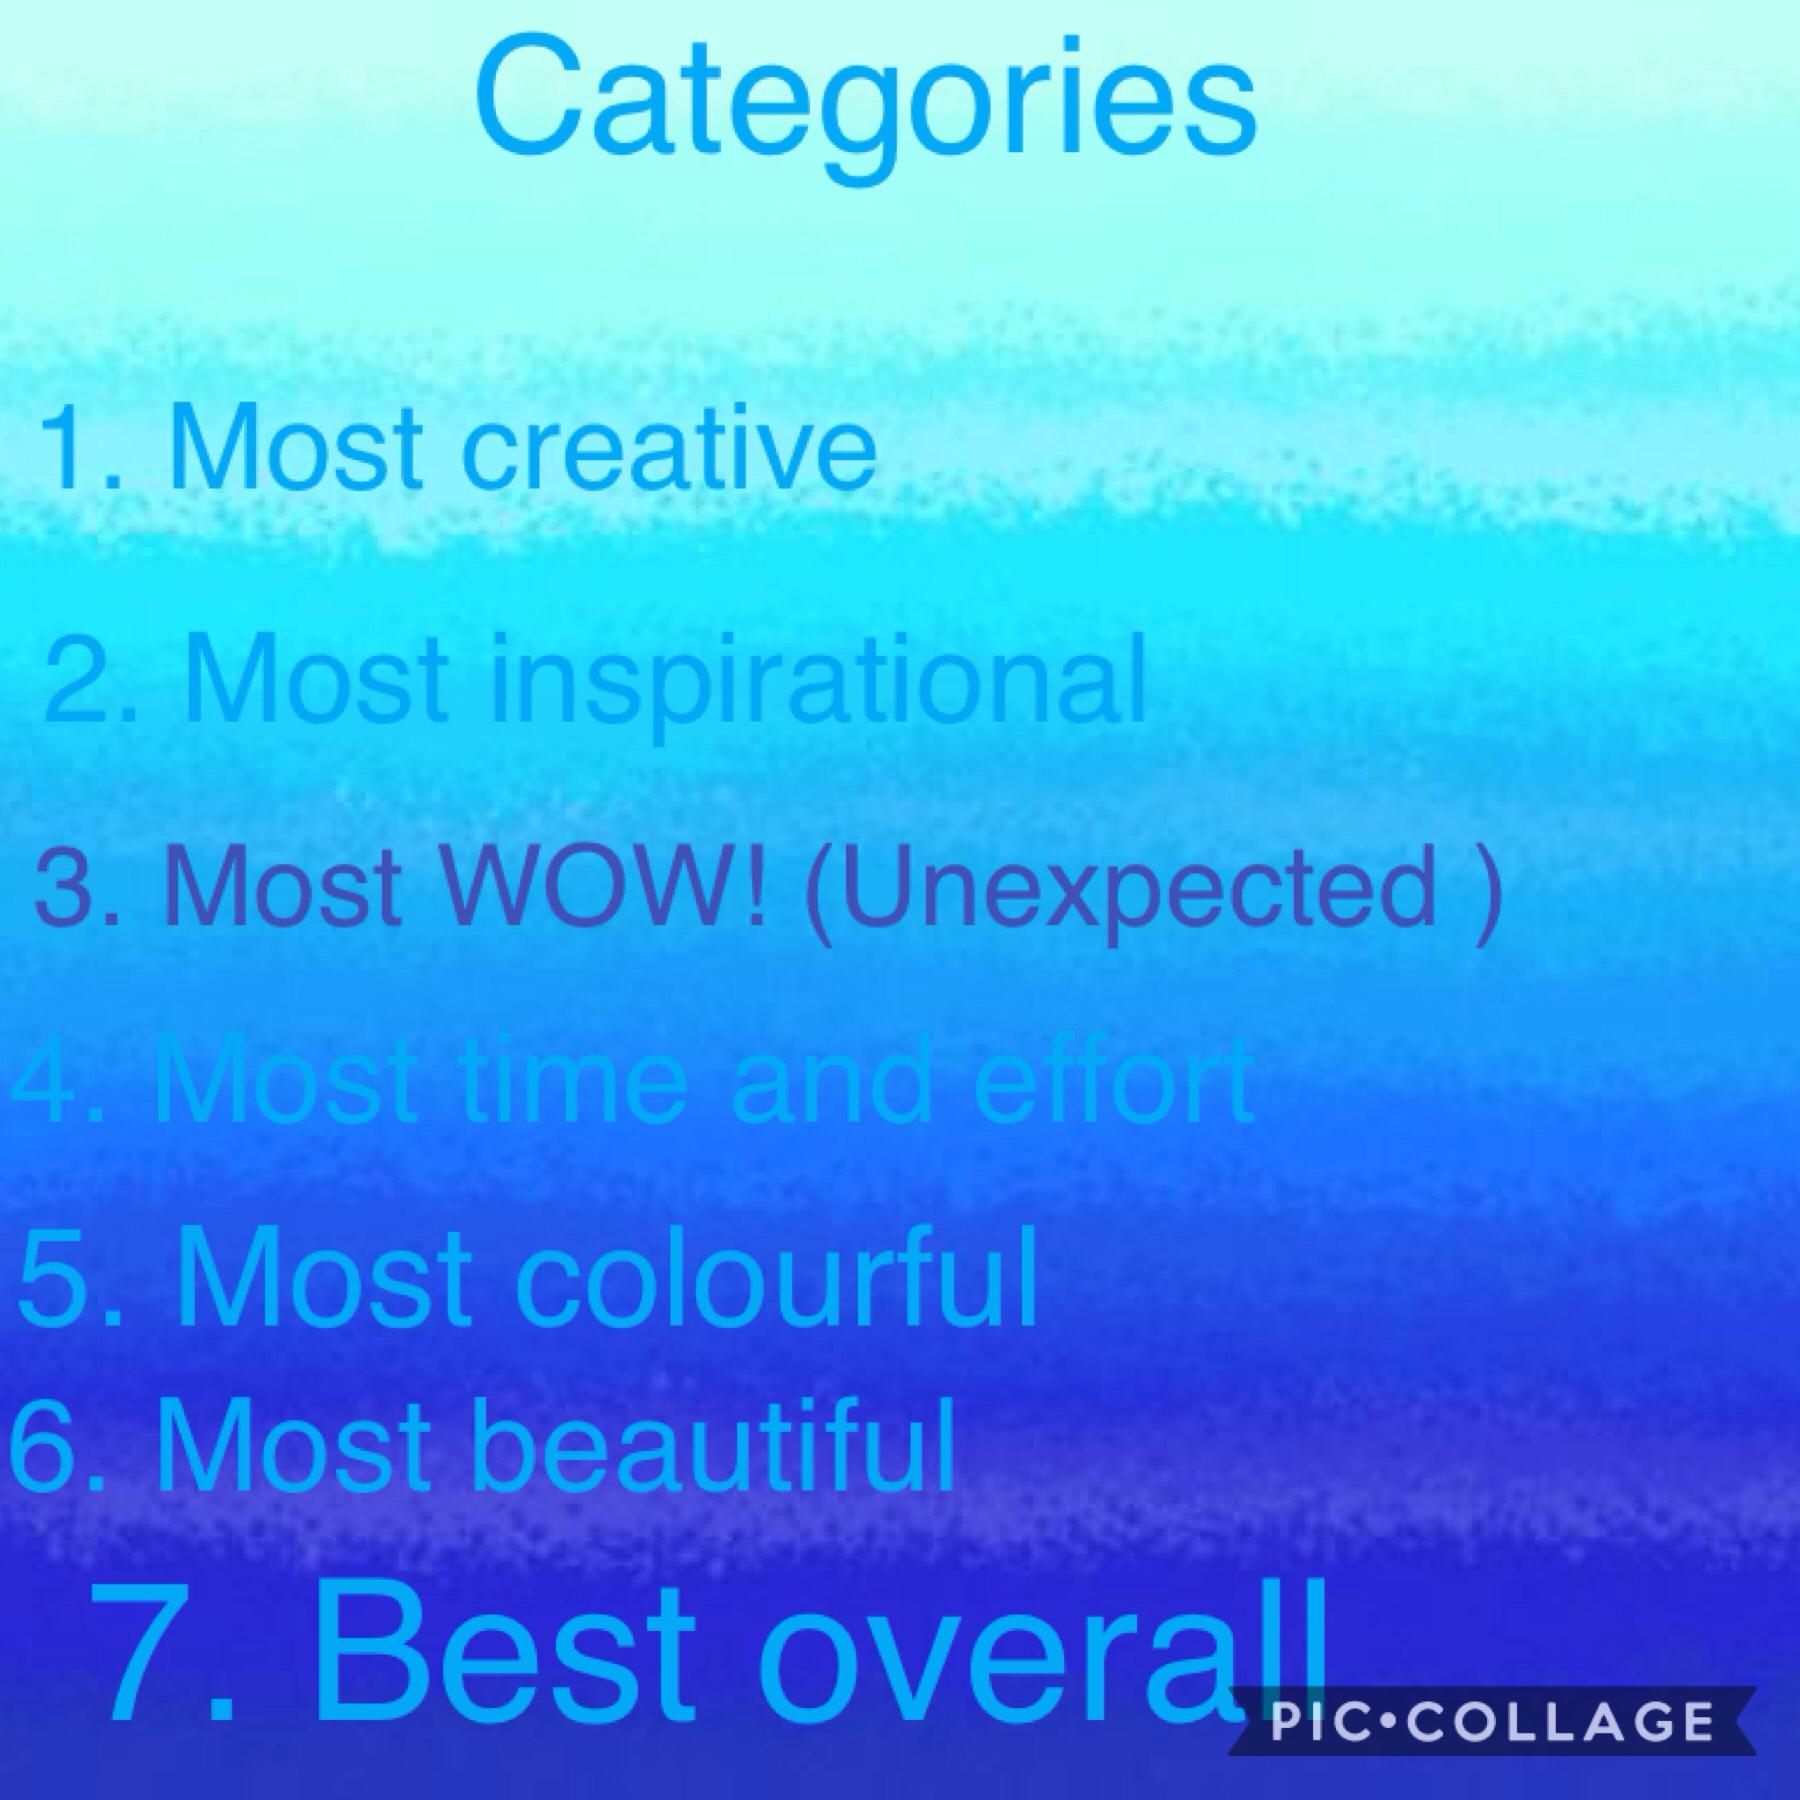 Categories for the games!